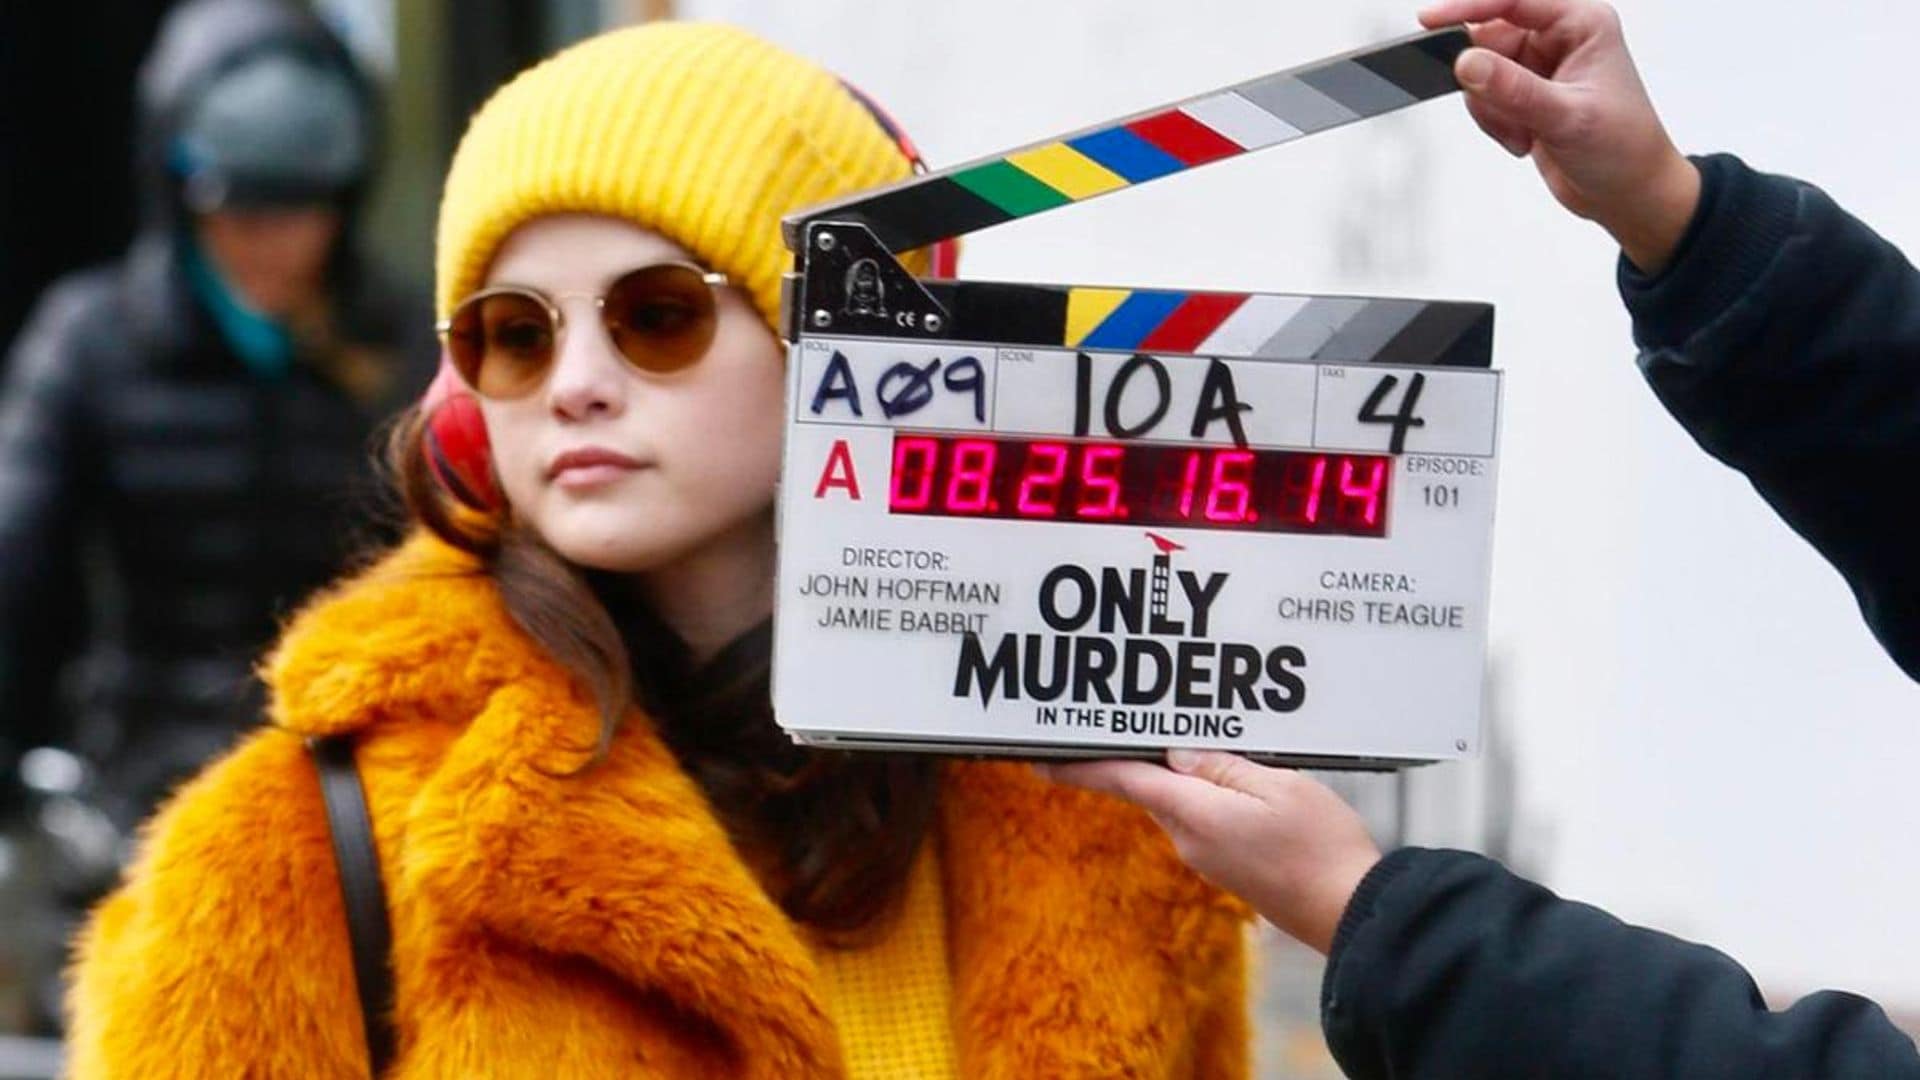 Selena Gomez rocks three different outfits on the set of ‘Only Murders in the Building’